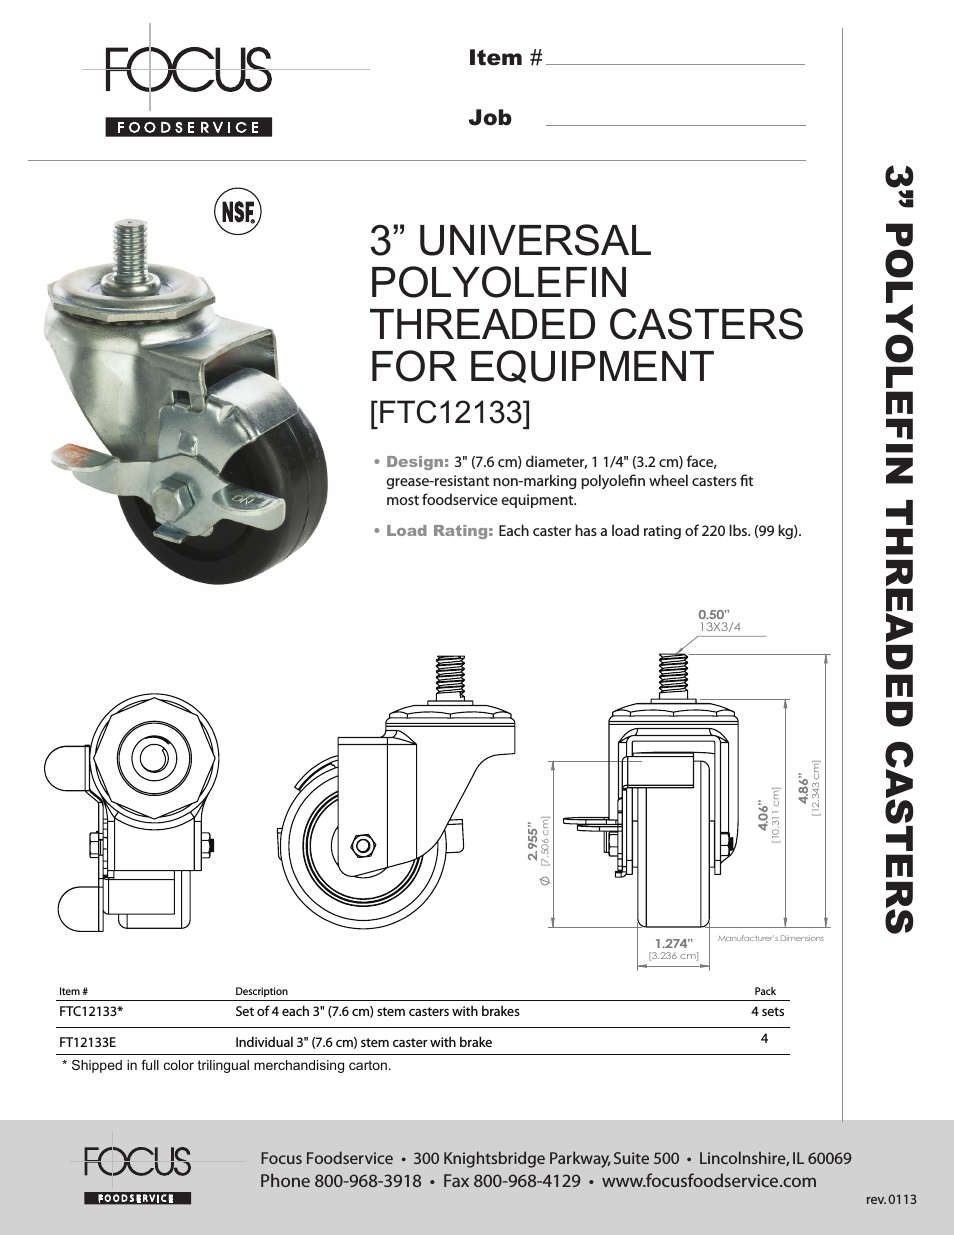 FTC12133 3” UNIVERSAL POLYOLEFIN THREADED CASTERS FOR EQUIPMENT - Specification Sheets